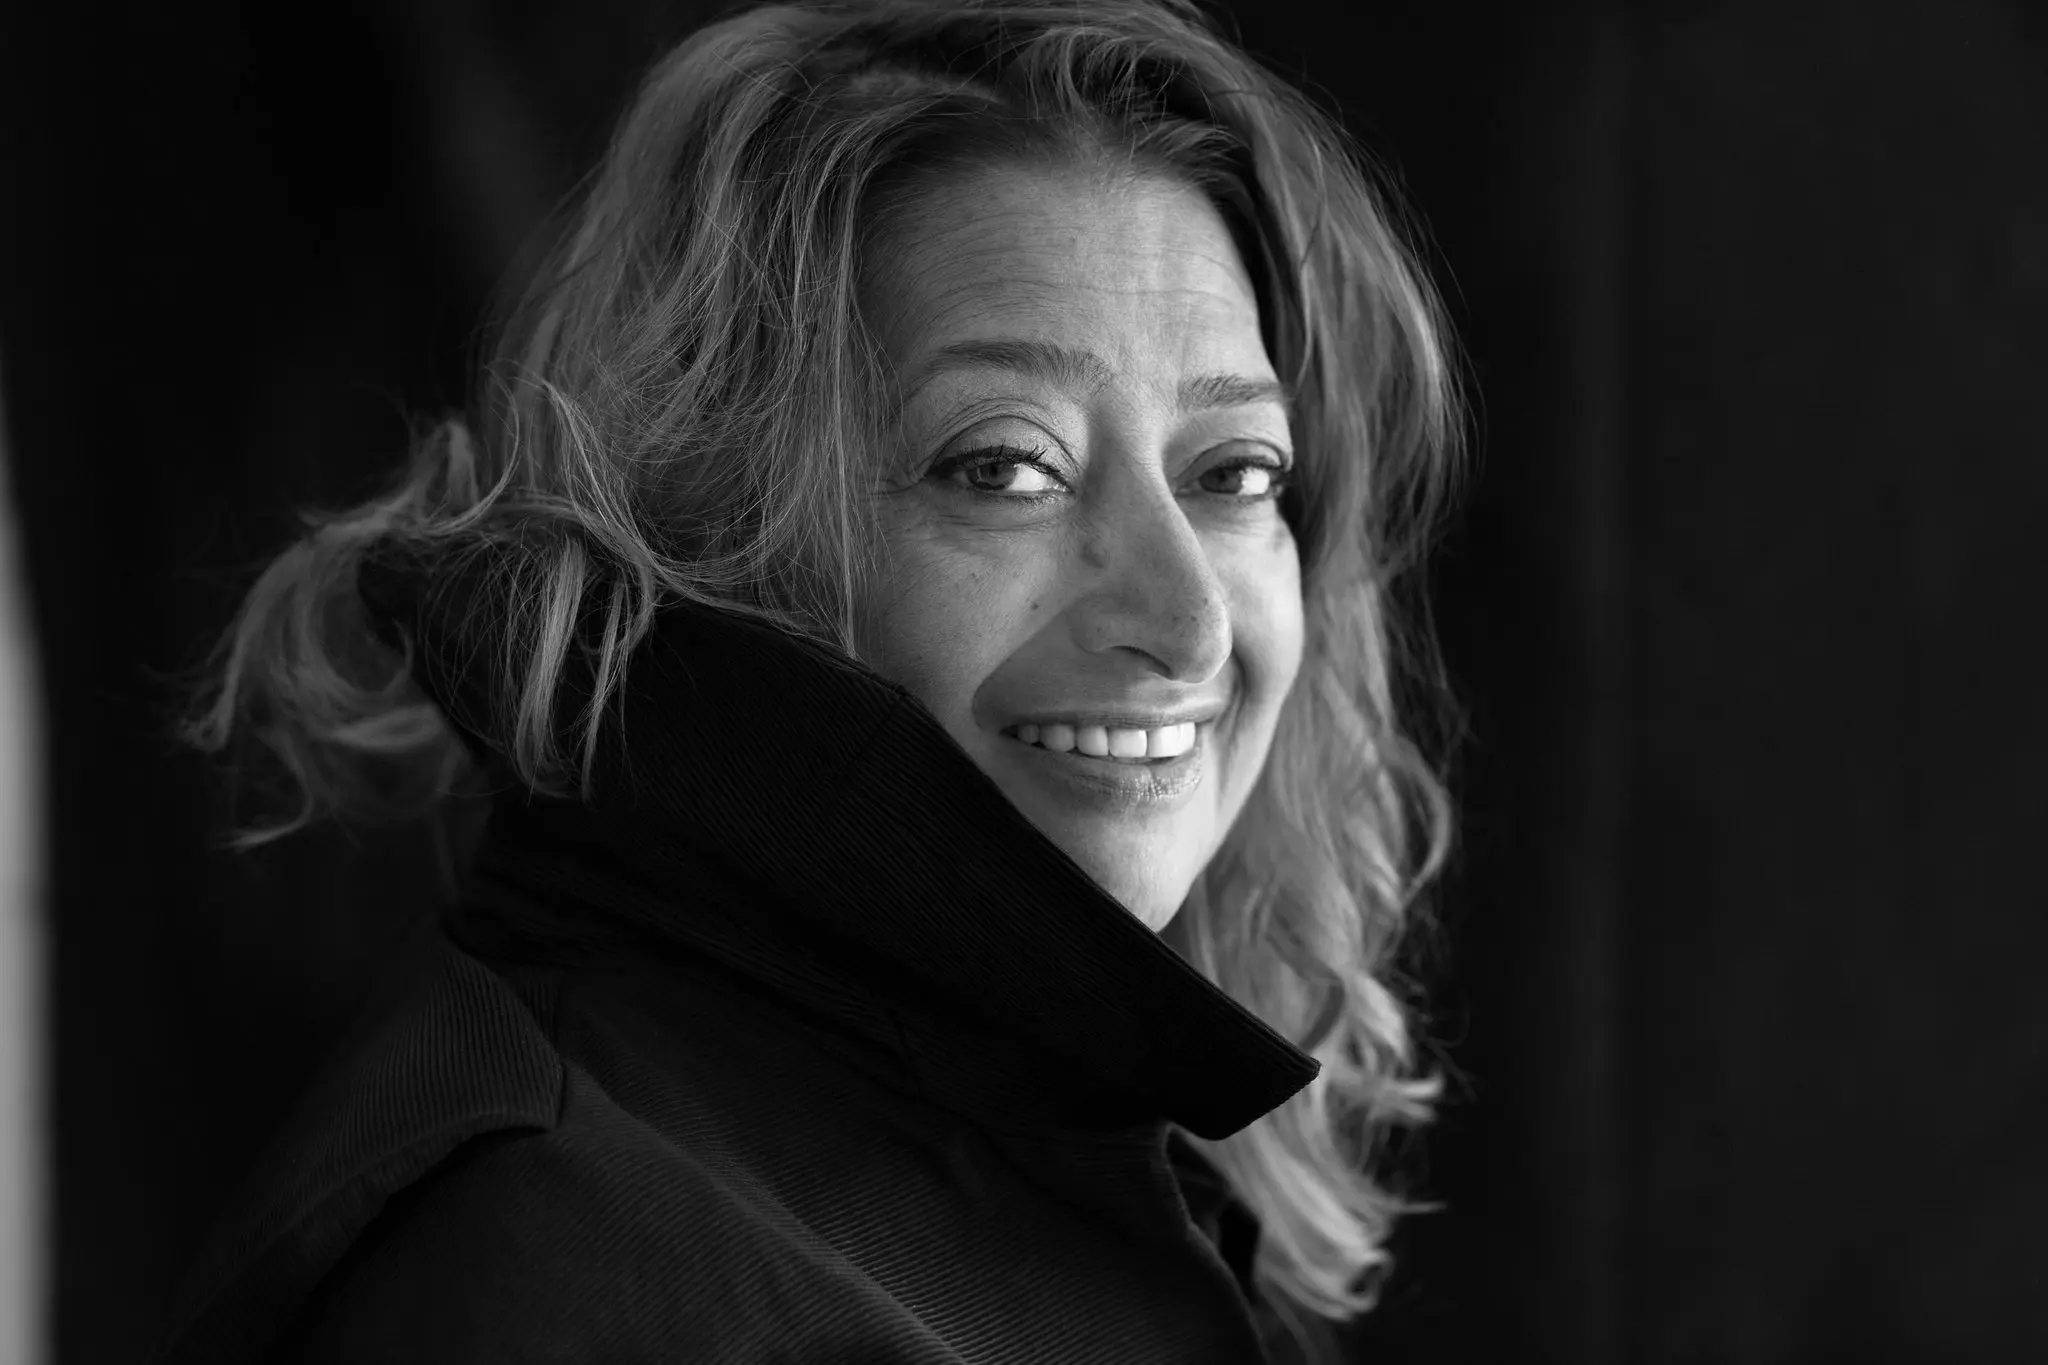 Zaha hadid stated, "i can see the incredible amount of need from other women for reassurance" regarding their potential for success in architecture. ©brigitte lacombe/zaha hadid architects